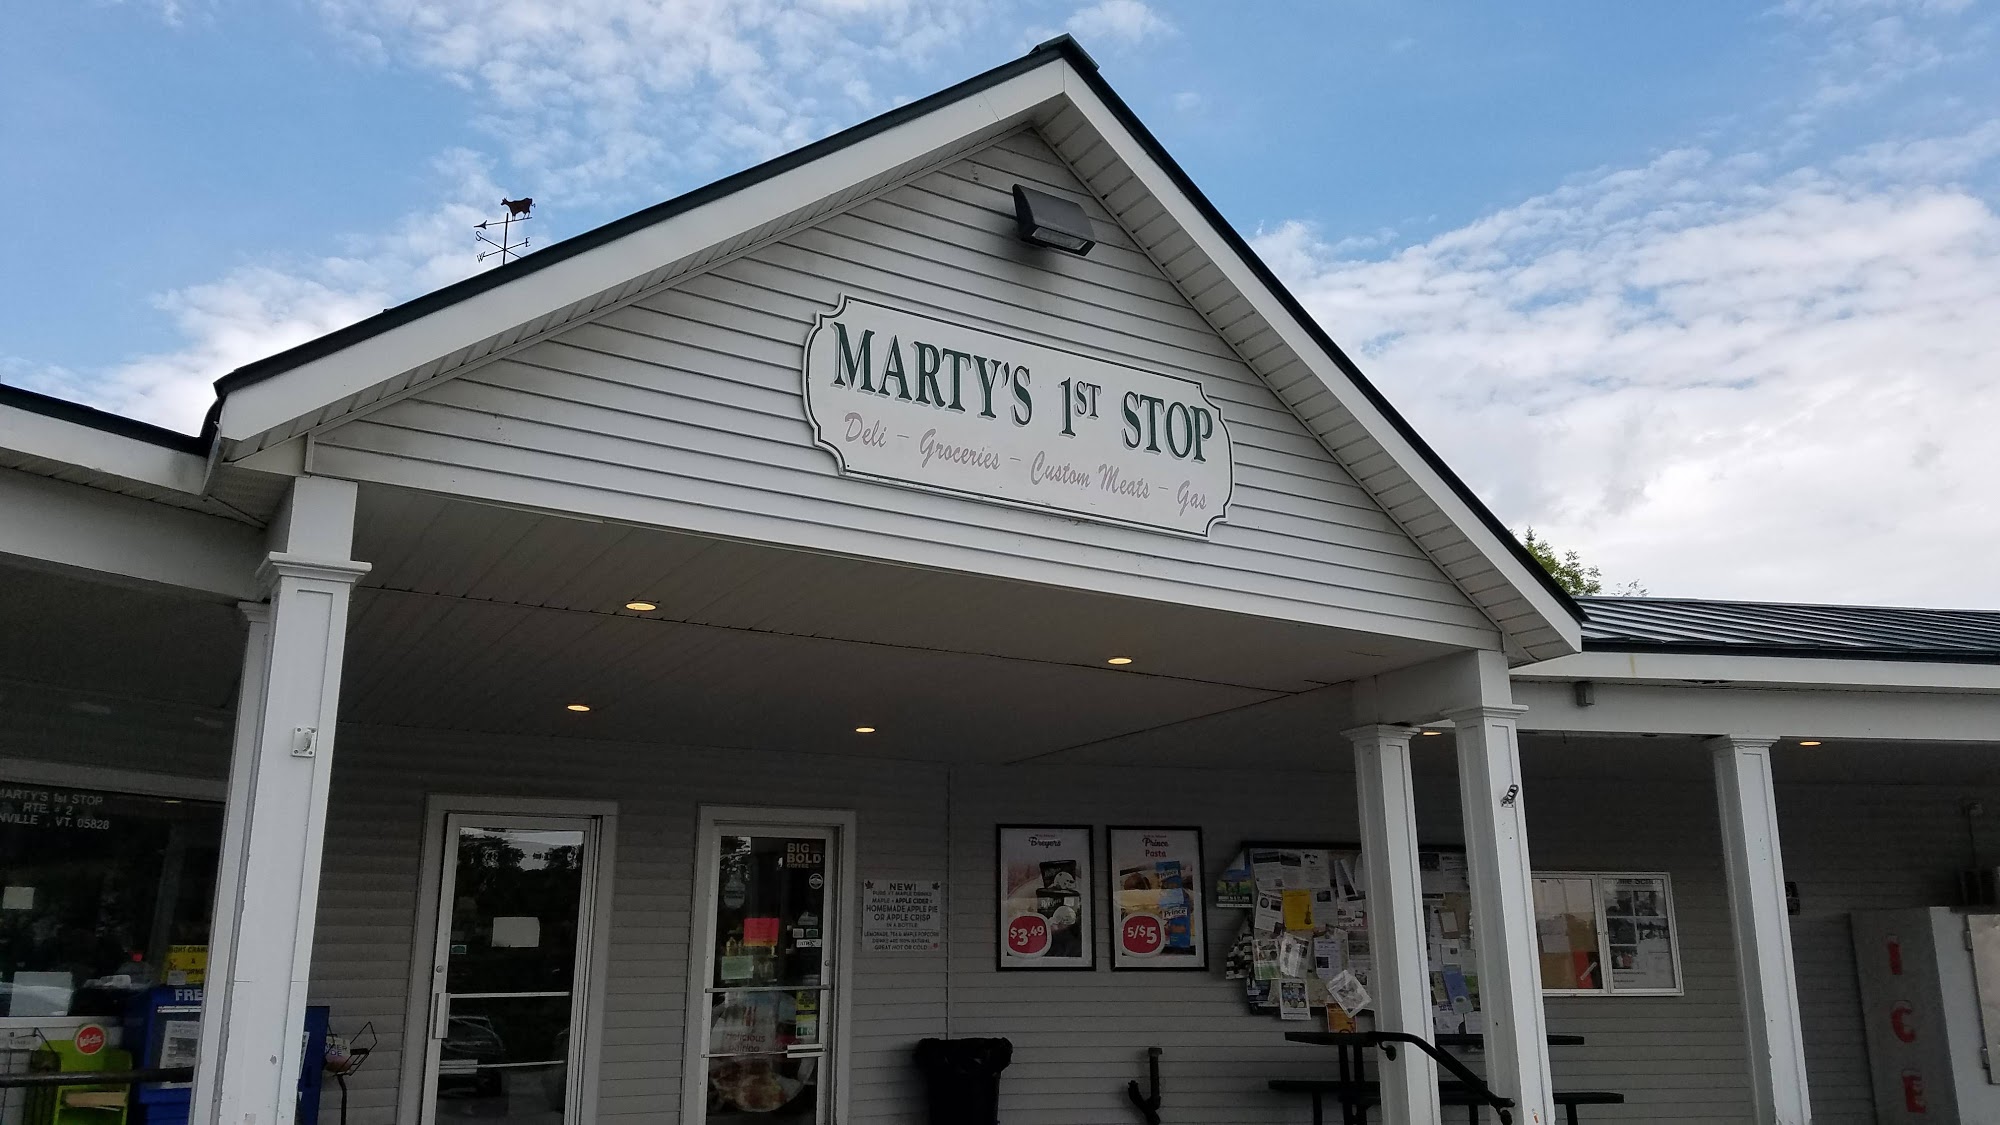 Marty's 1st Stop